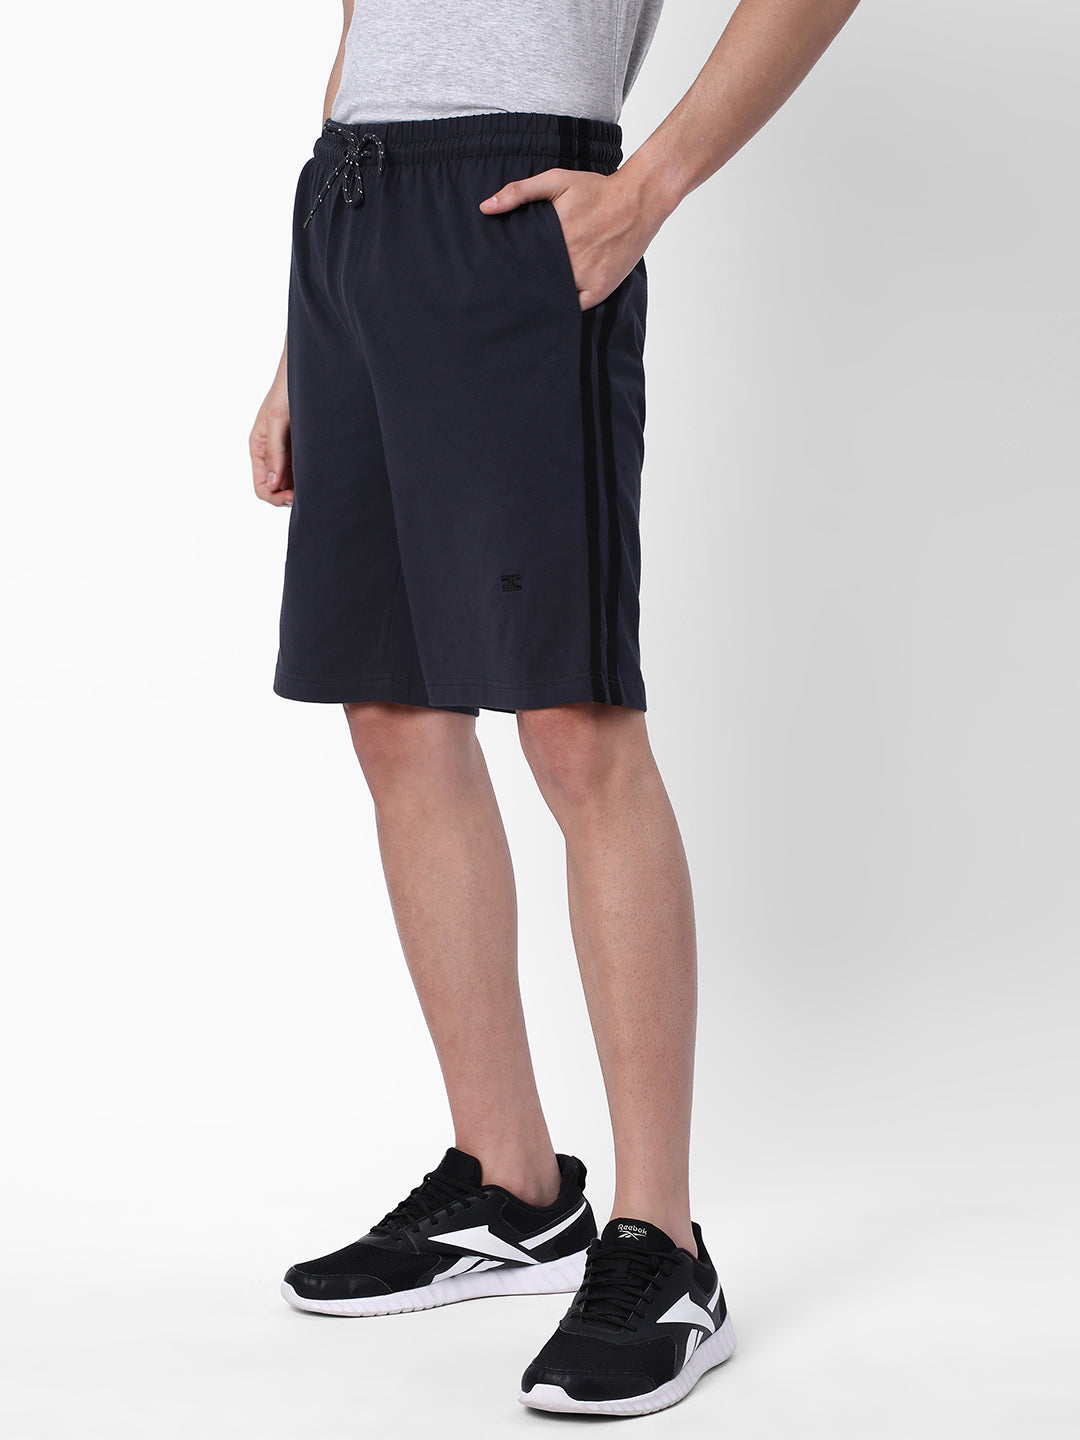 Cotstyle Men's Super Combed Cotton Regular Fit Solid Shorts with Side Pockets - Dark Navy, Style no.SH901